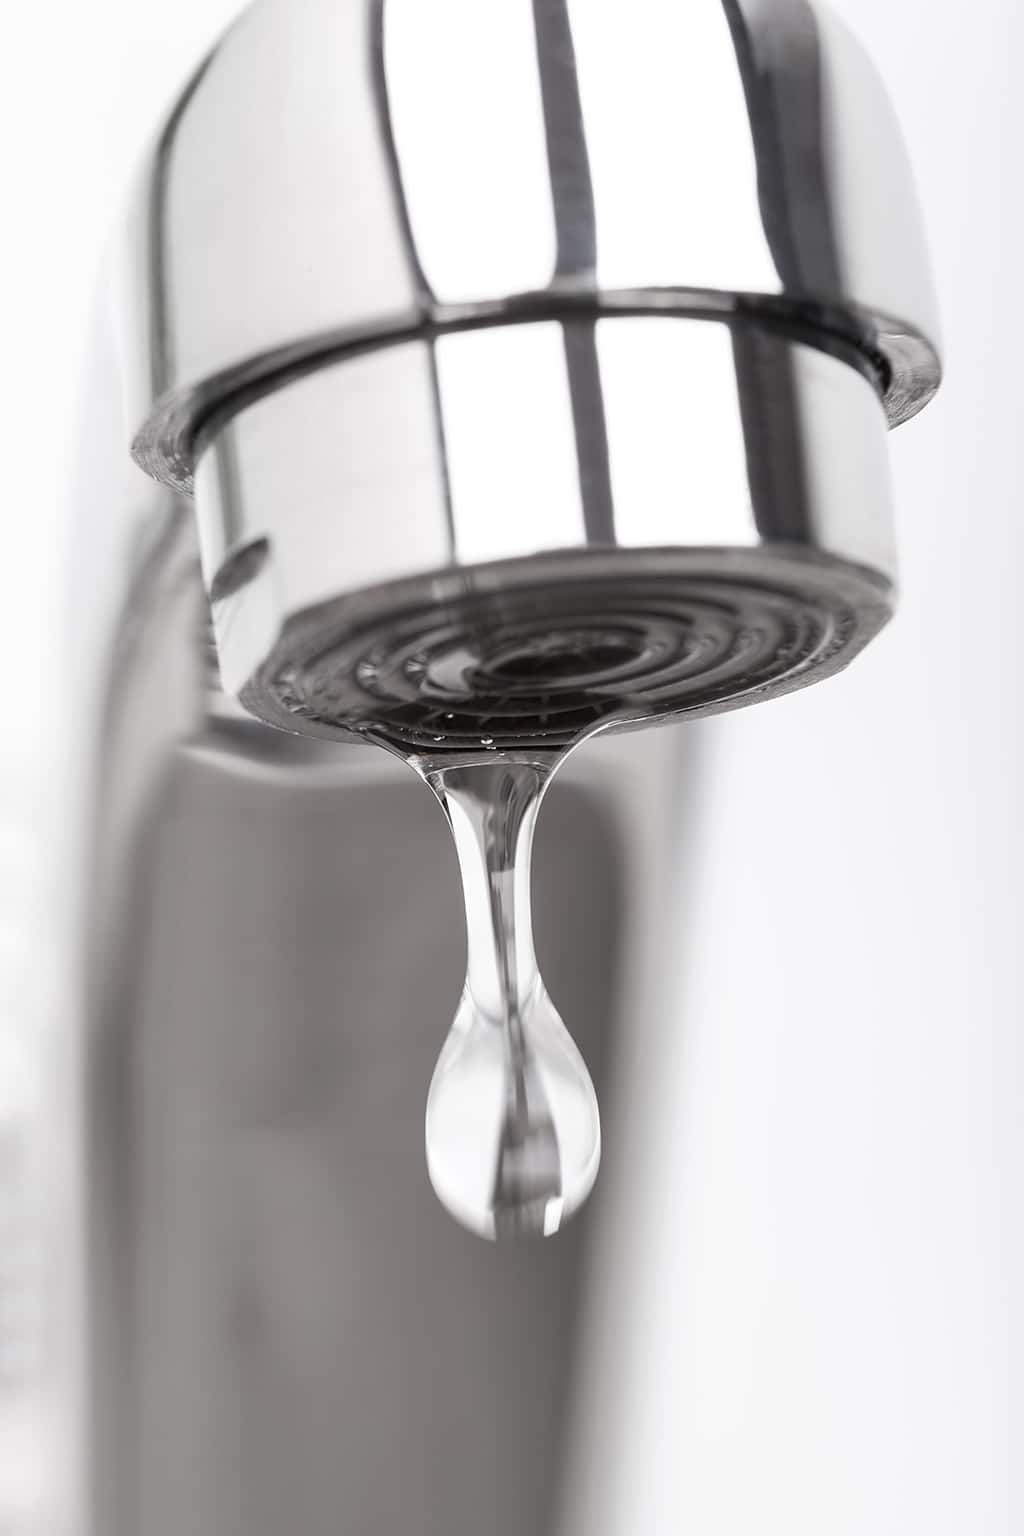 Simple Reasons You Need A <strong>Plumber</strong> | <strong>Irving, TX</strong>